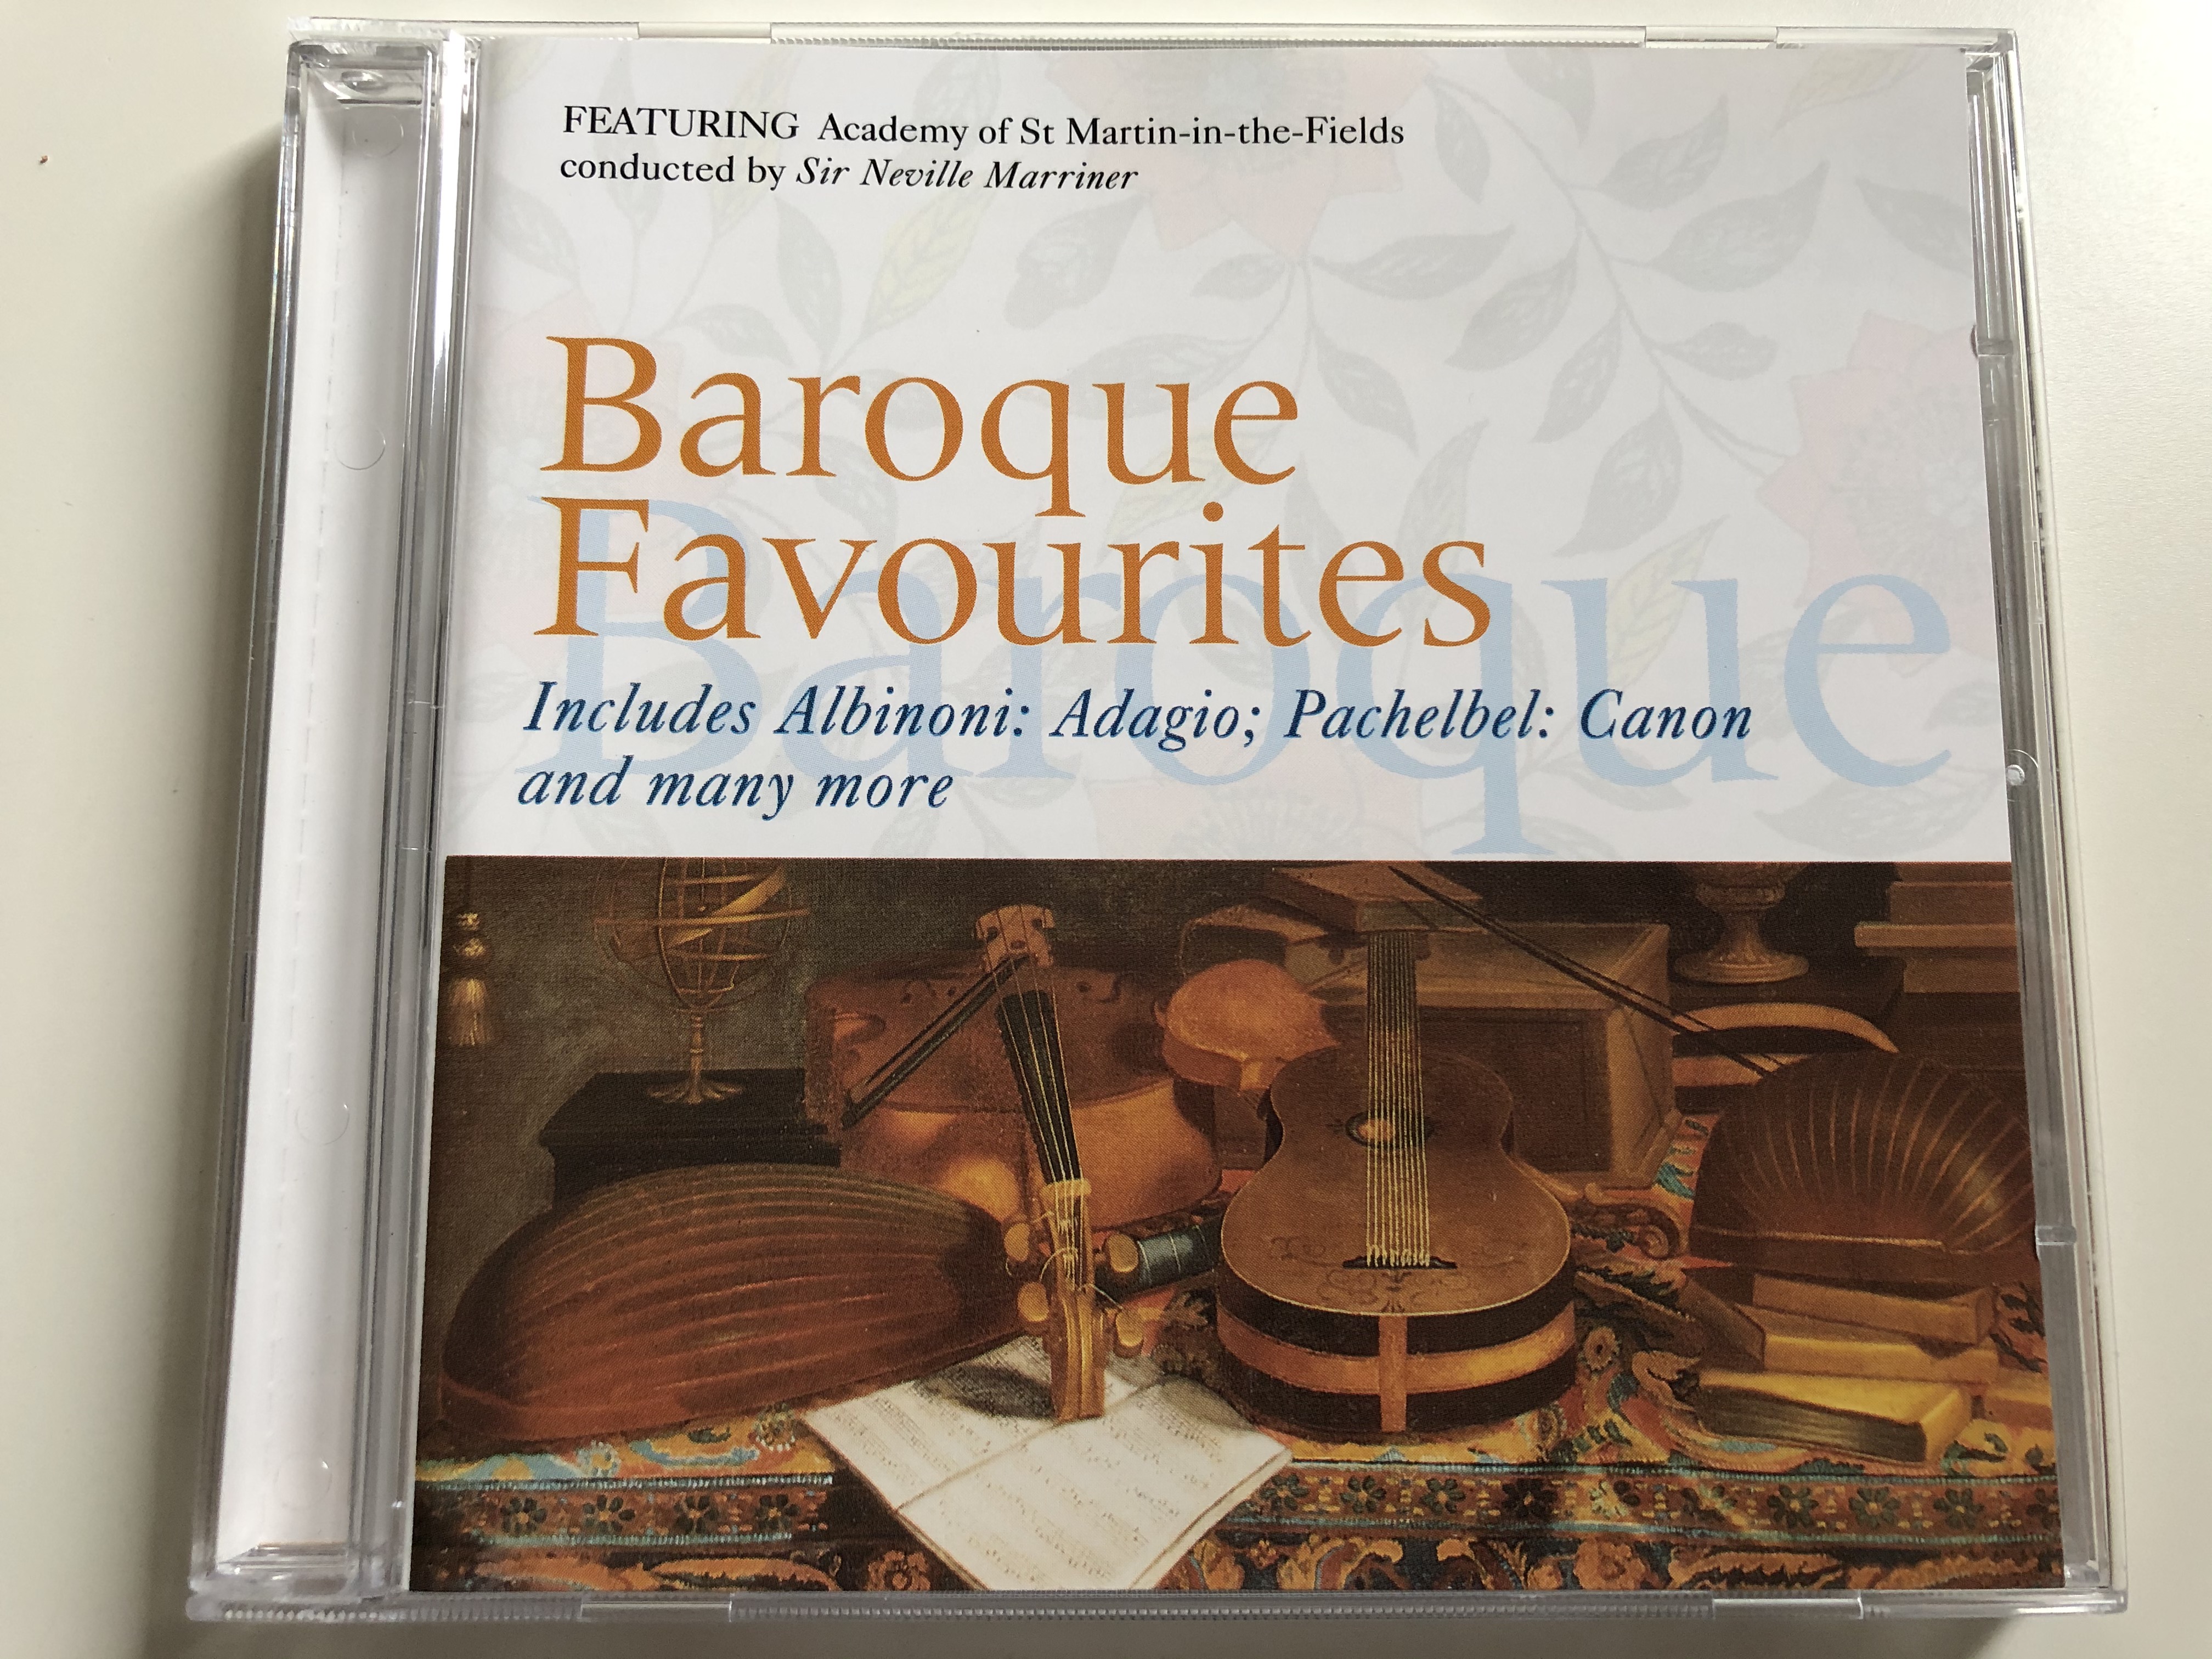 baroque-favourites-includes-albinoni-adagio-pachelbel-canon-and-many-more-featuring-academy-of-st-martin-in-the-fields-conducted-by-sir-neville-marriner-belart-audio-cd-1993-450-040-2-1-.jpg